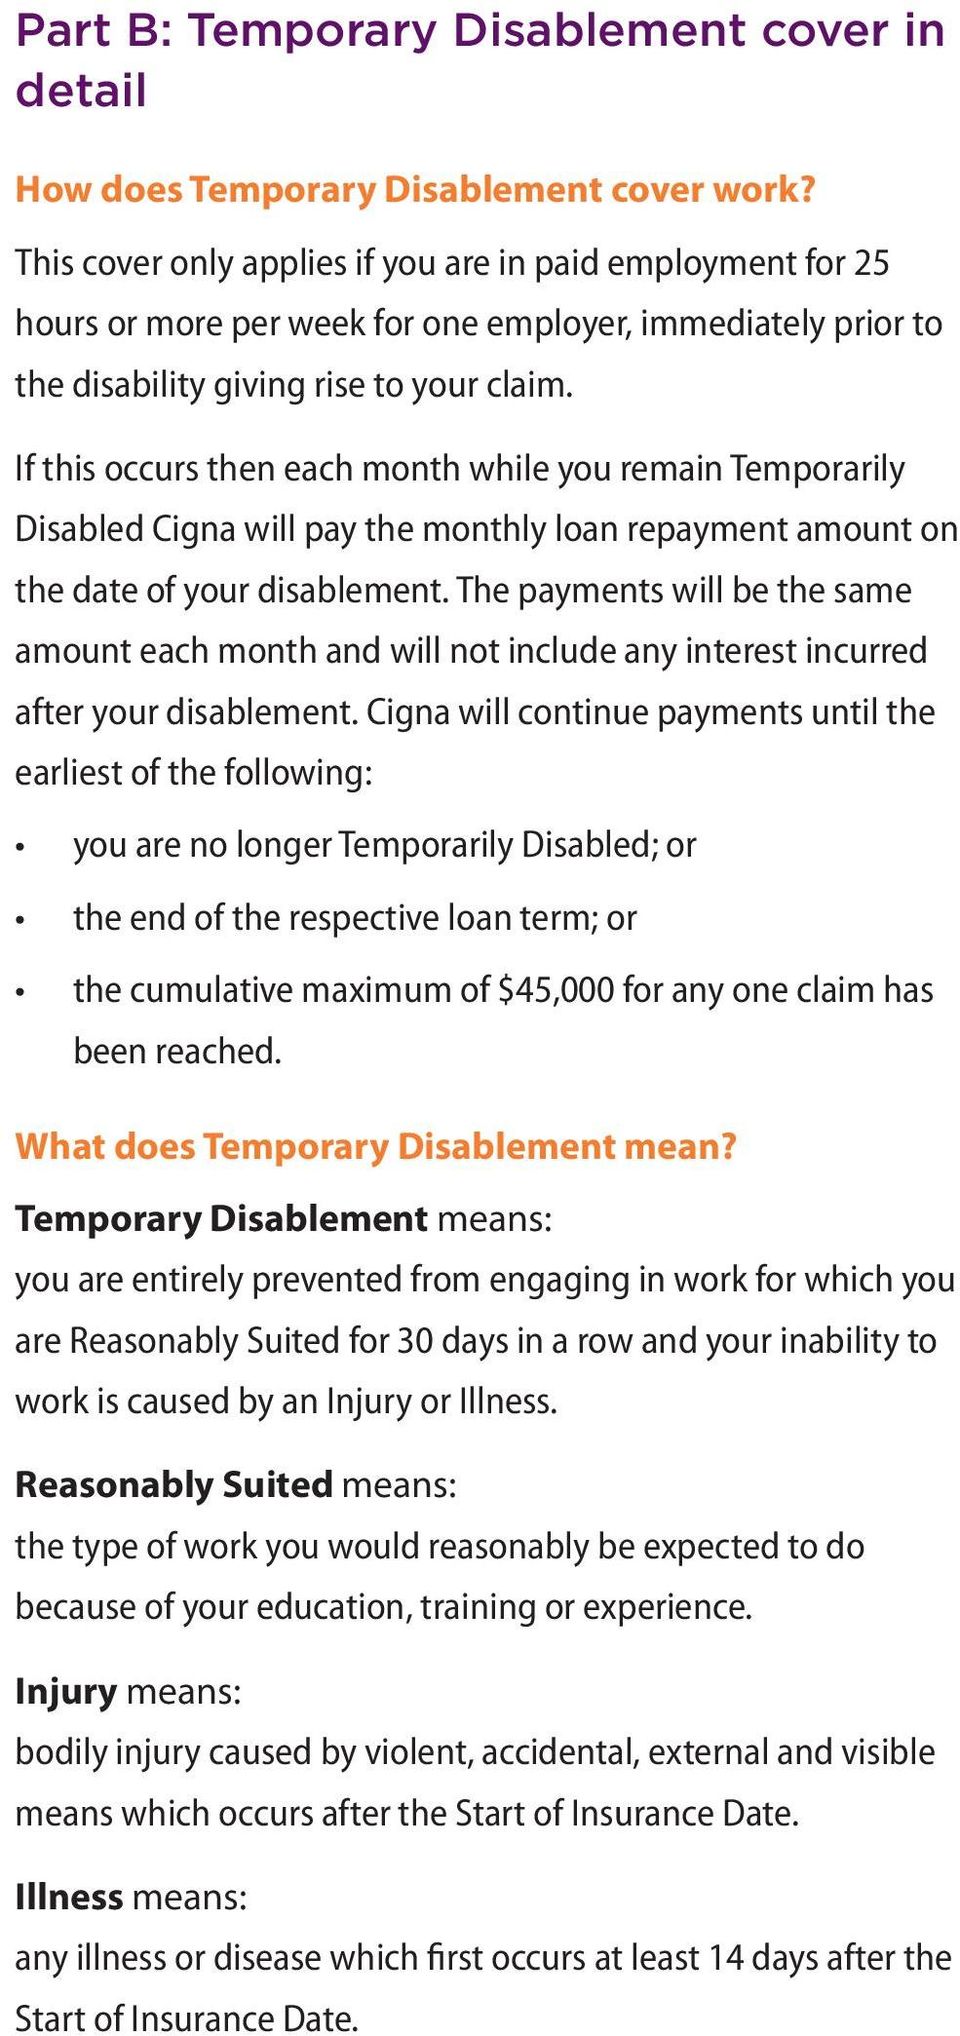 If this occurs then each month while you remain Temporarily Disabled Cigna will pay the monthly loan repayment amount on the date of your disablement.